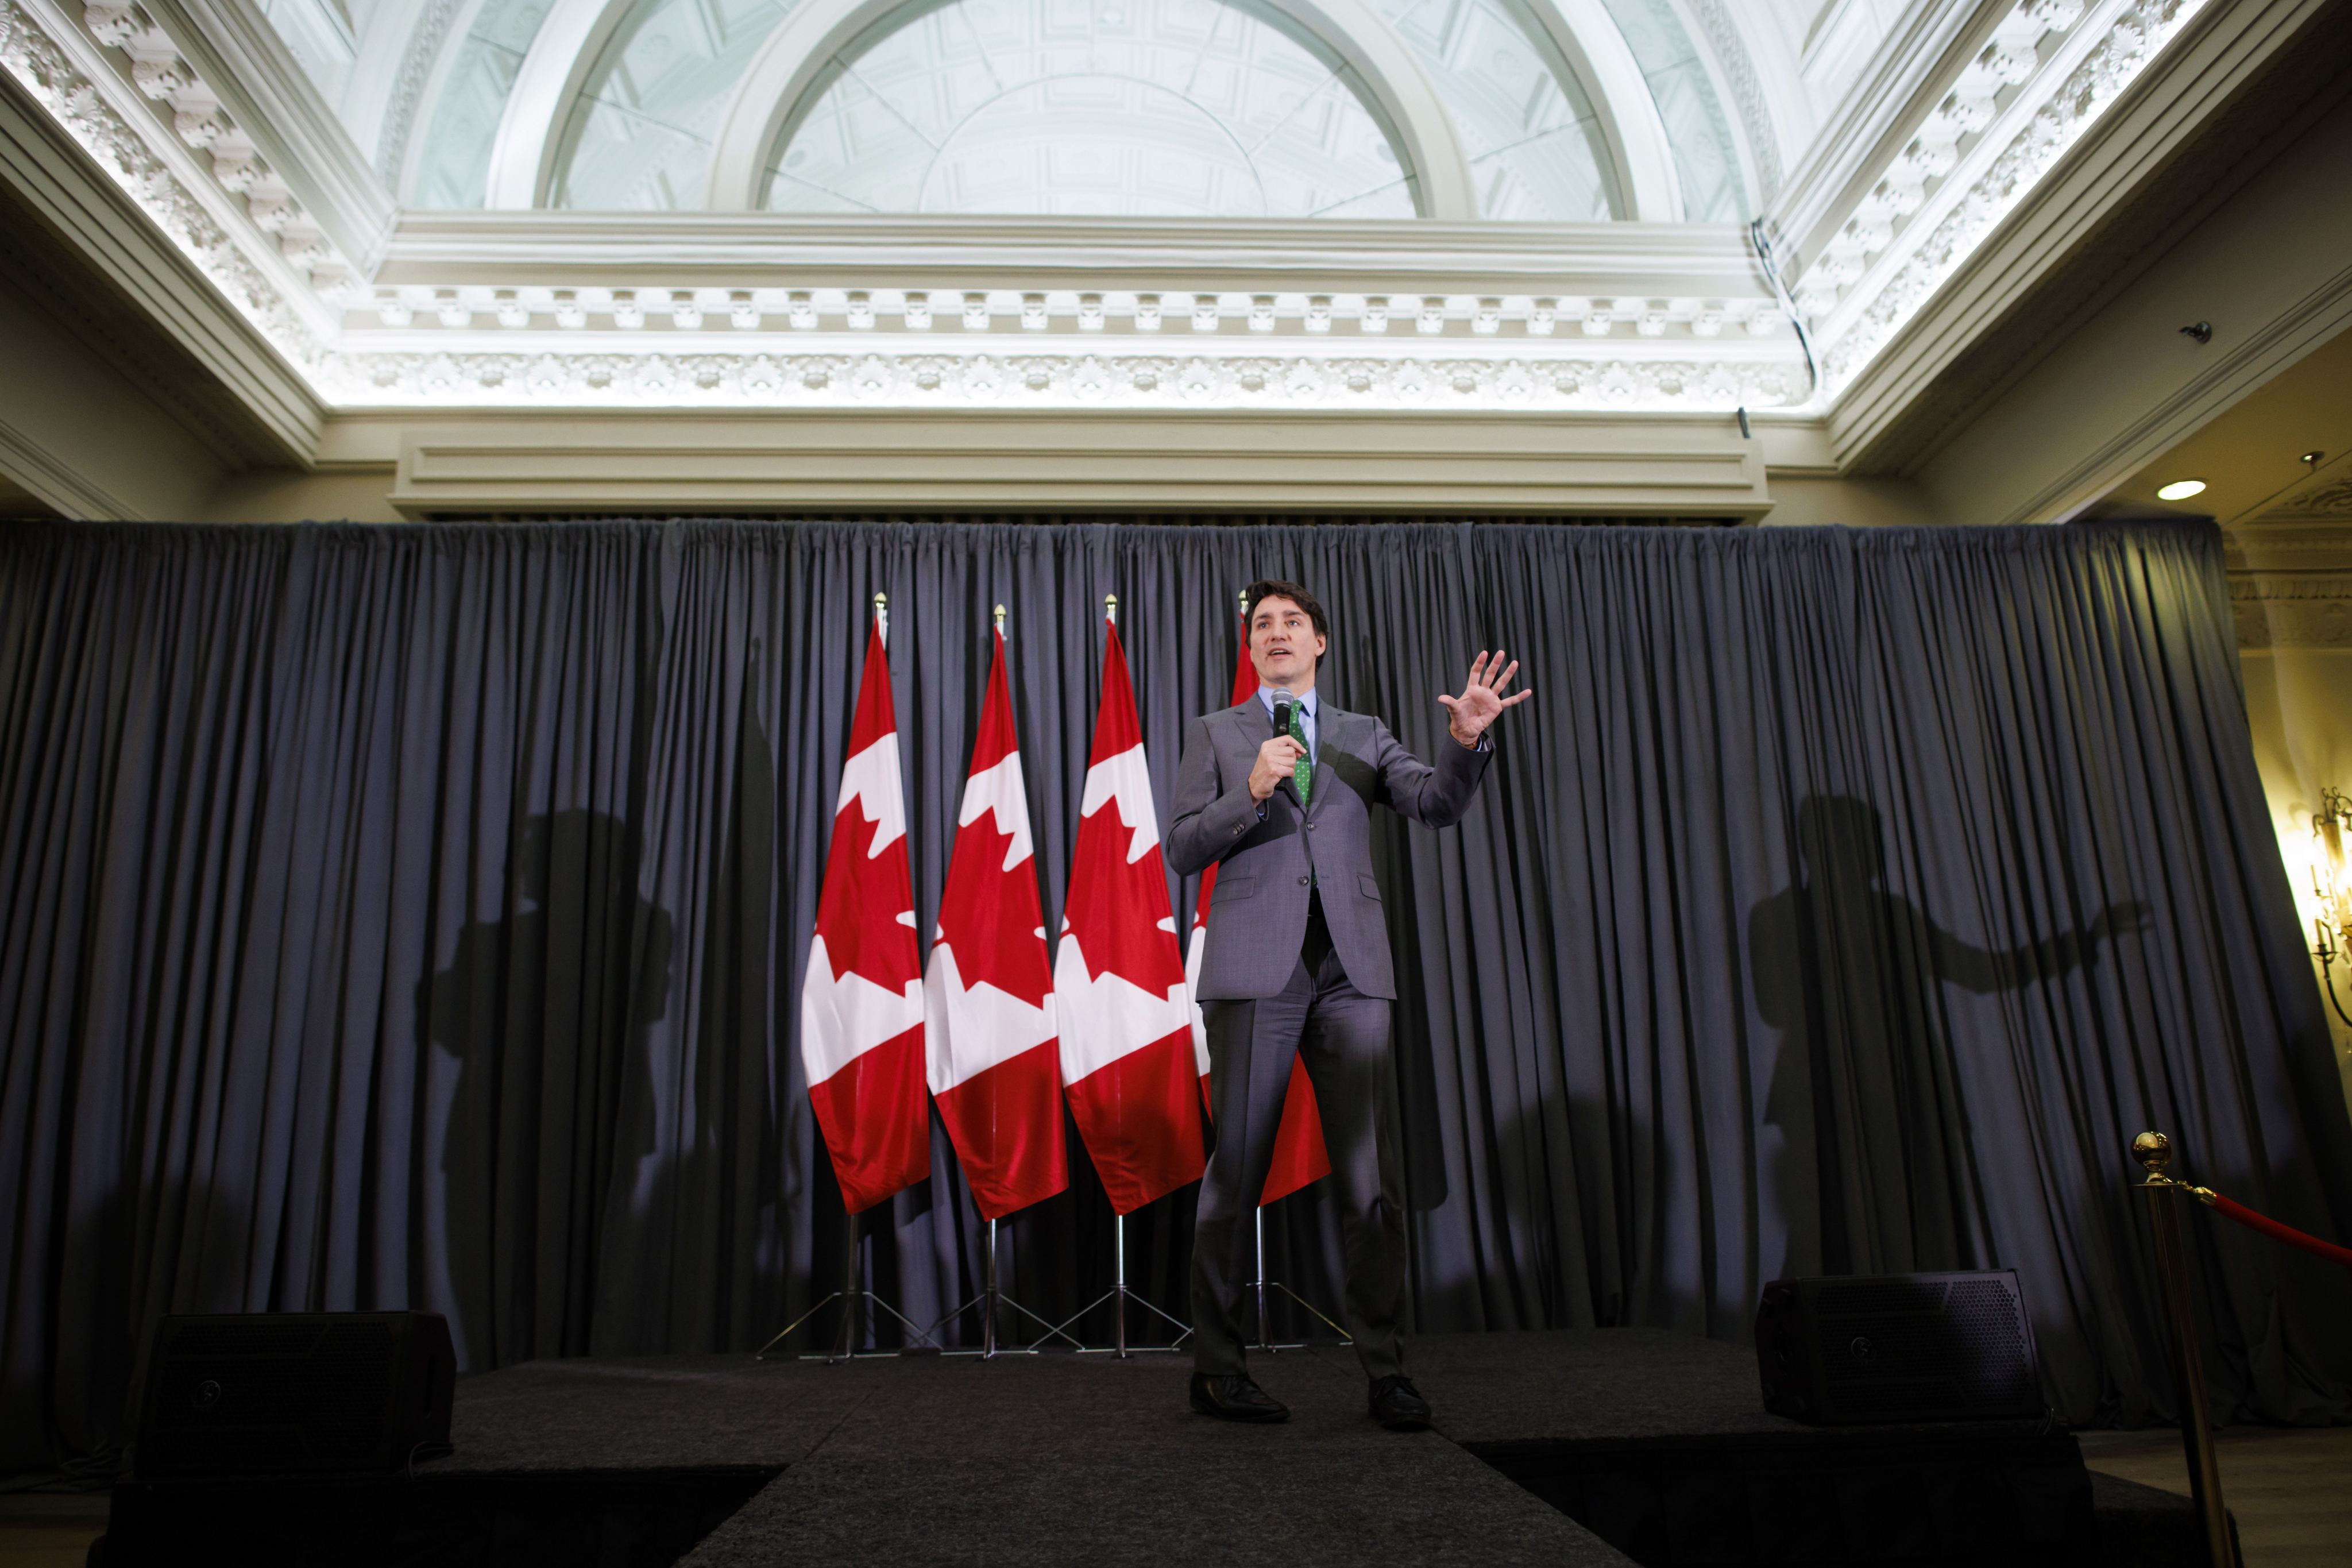 Canadian Prime Minister Justin Trudeau speaks during a fundraising event in Toronto on March 15. Photo: Zuma Press/dpa